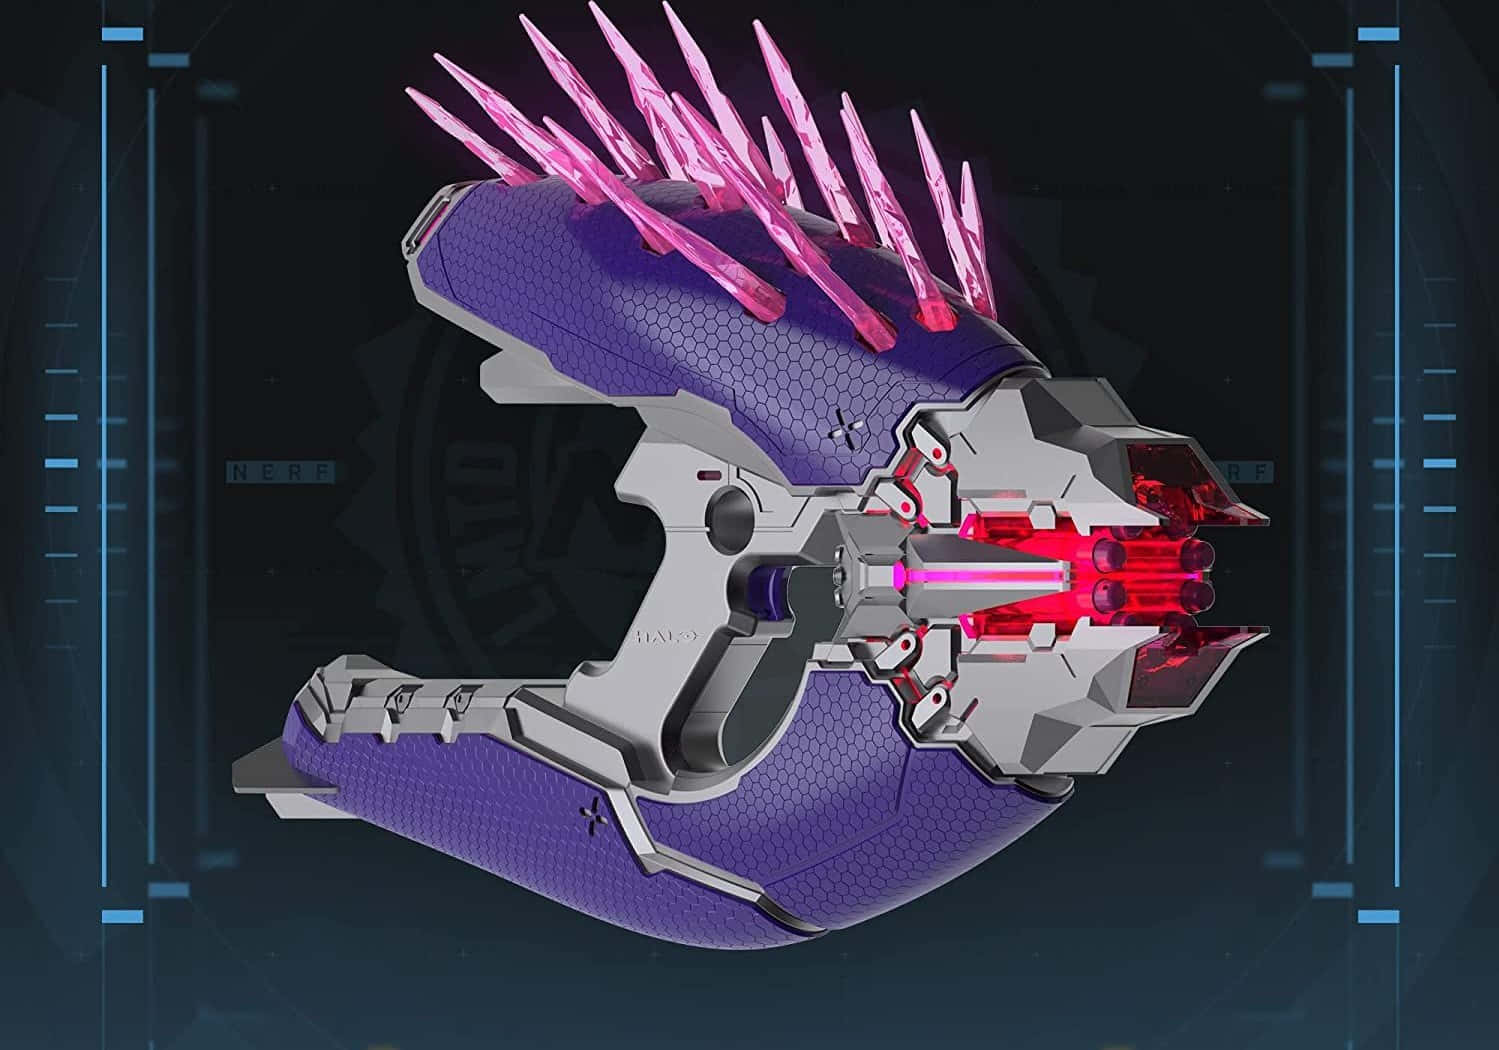 Download The iconic Needler from the popular Halo video game series ...